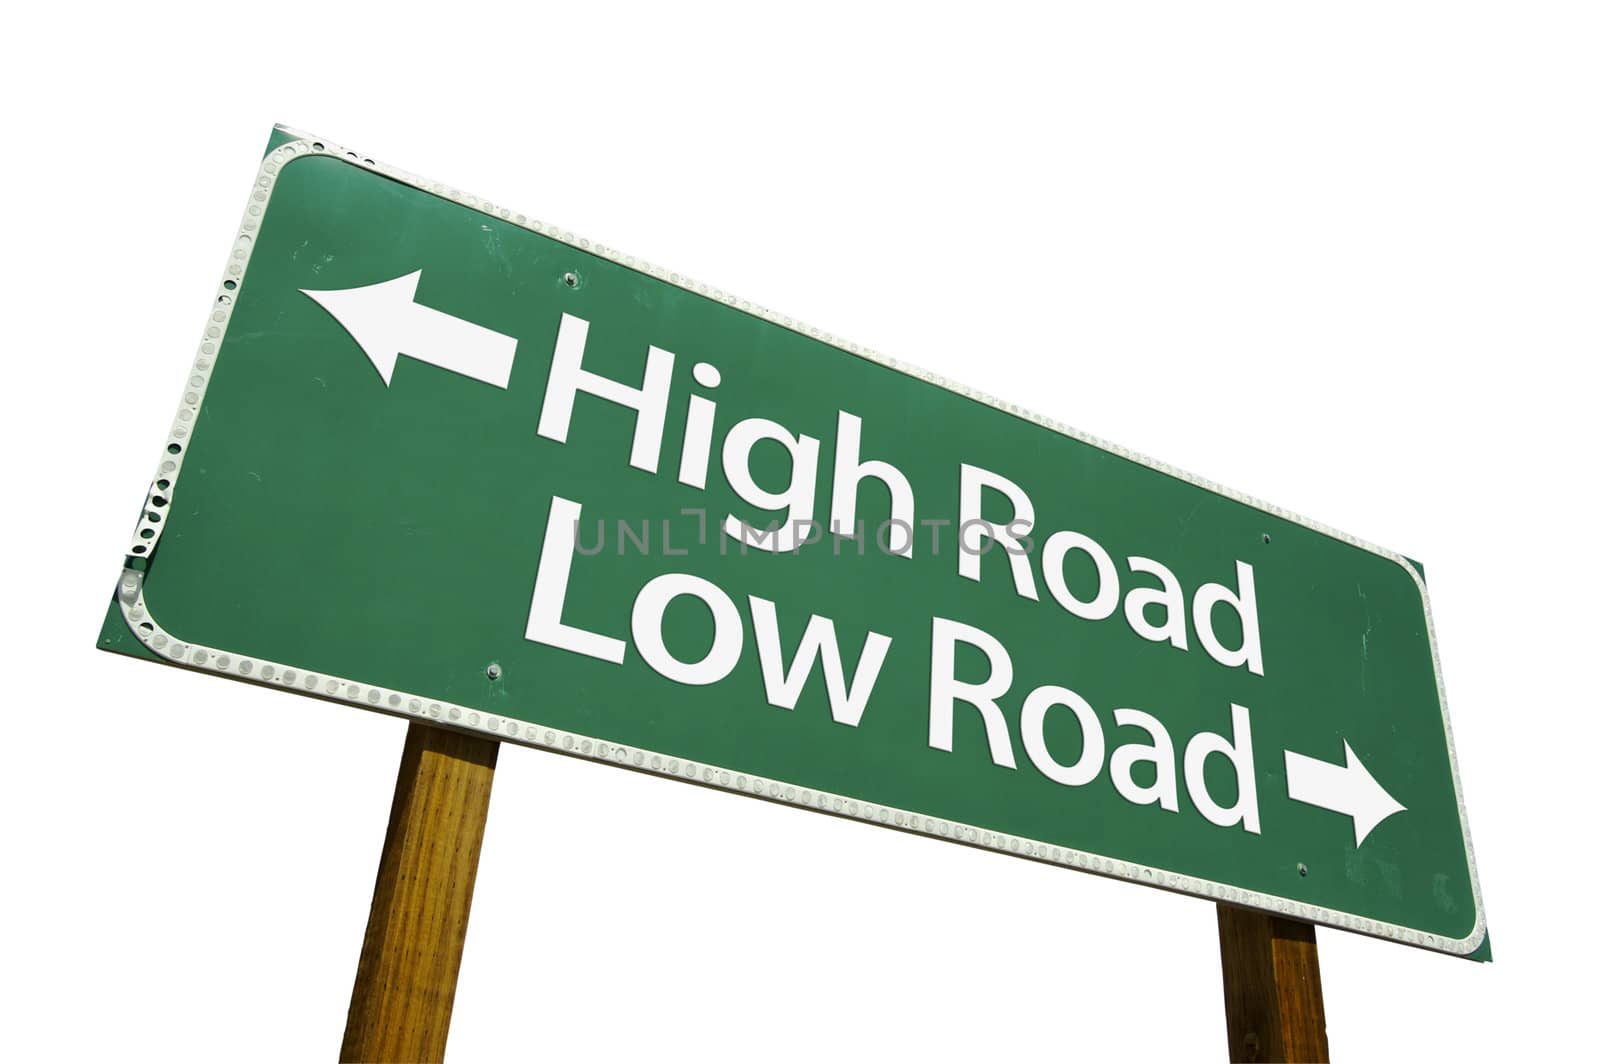 High Road, Low Road  - Road Sign isolated on White with Clipping Path